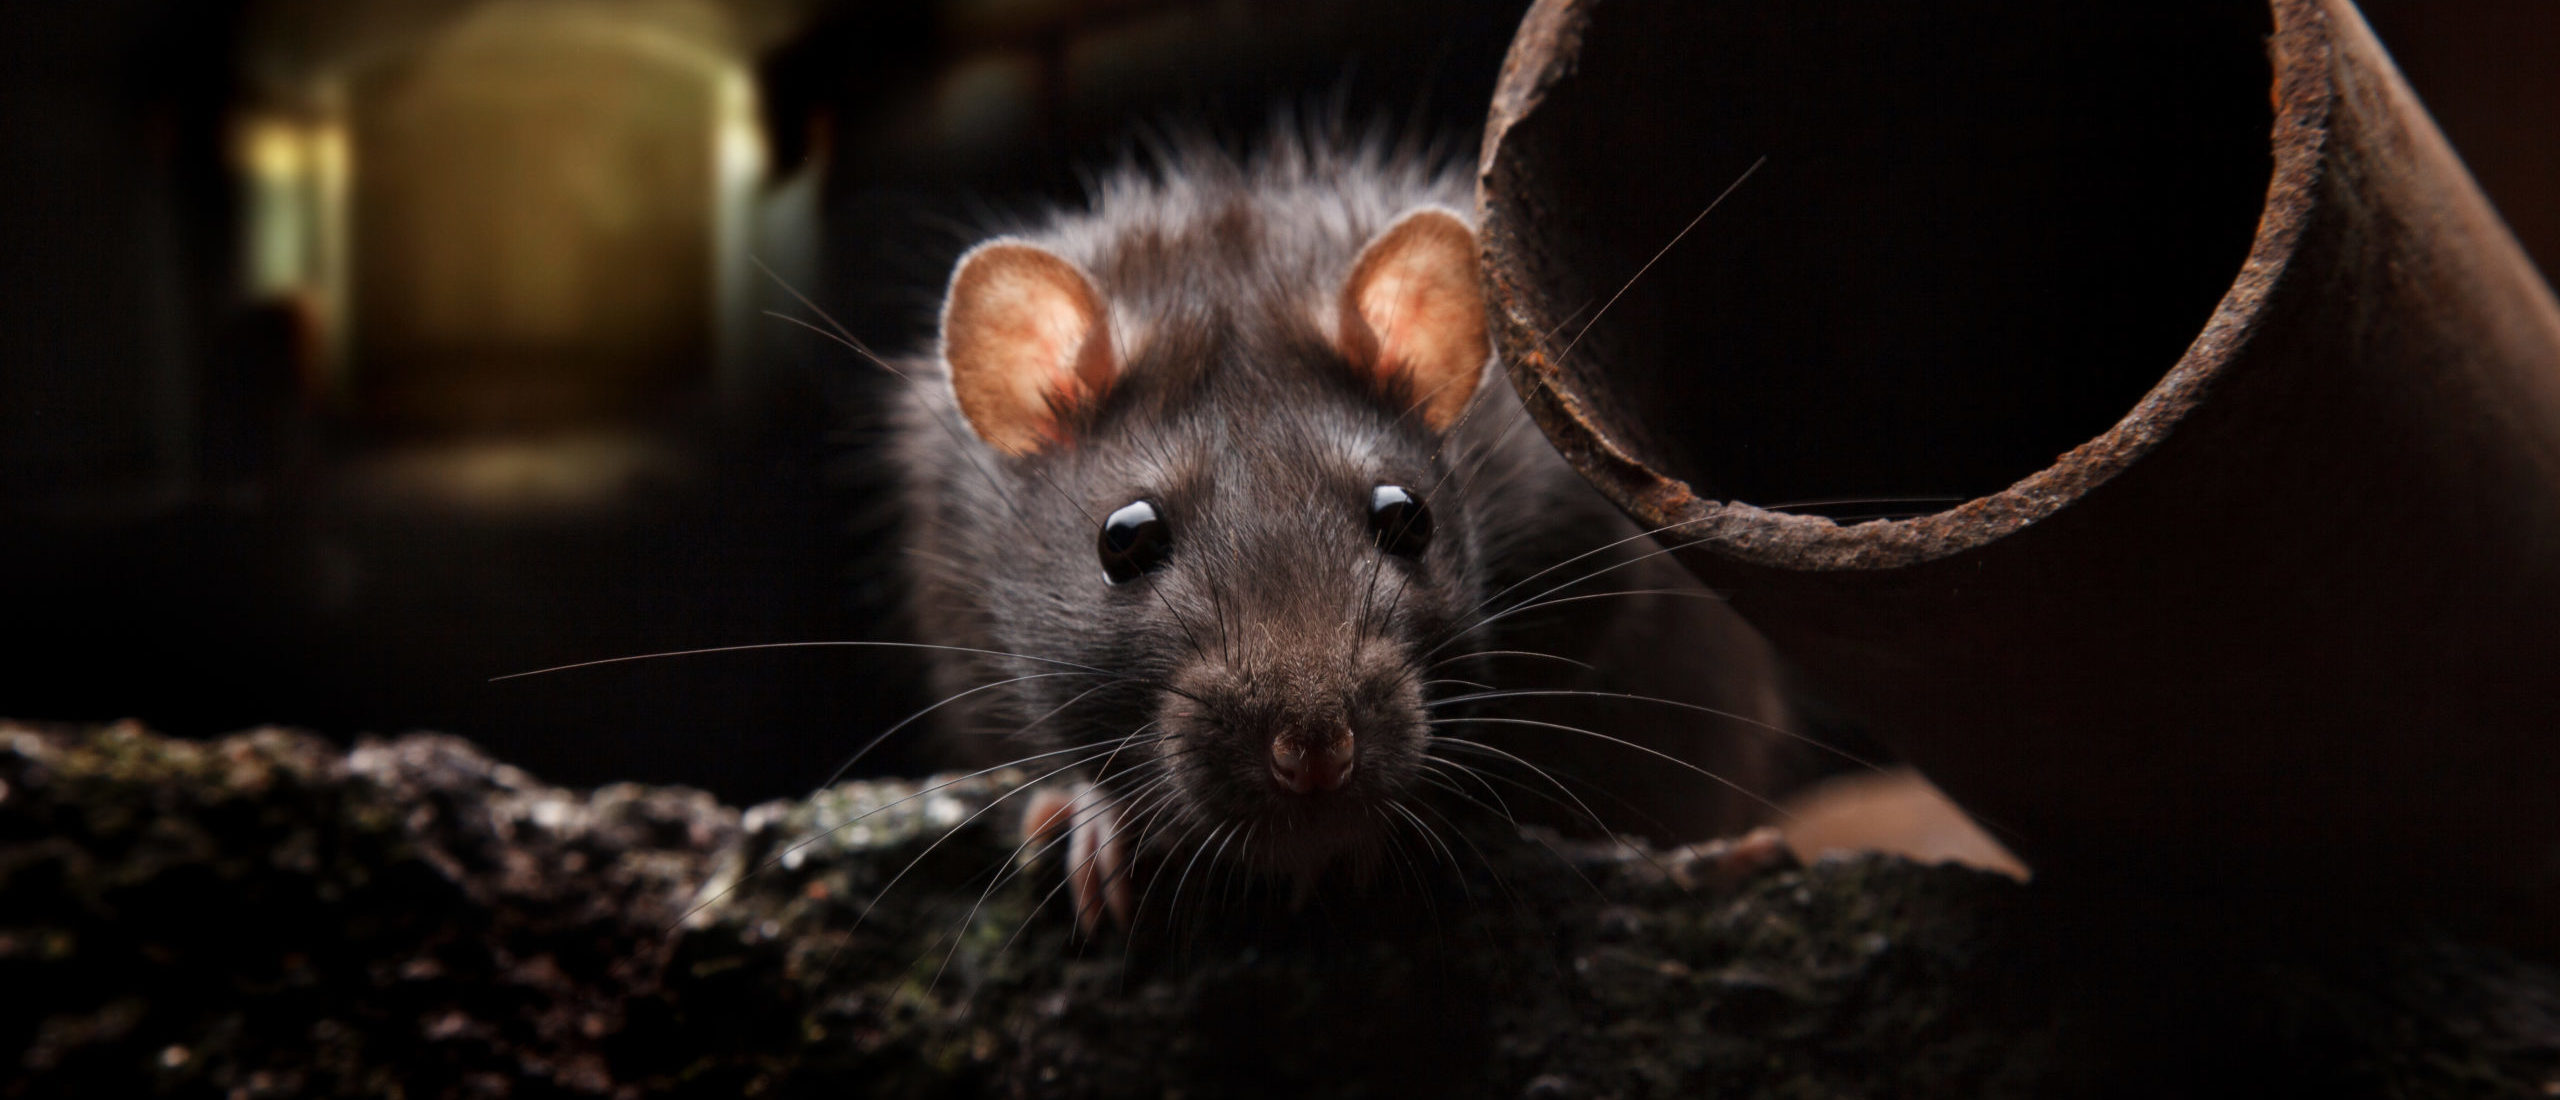 Scientific Journal Tricked Into Publishing AI-Generated Paper About Rat With Massive … Ya Know